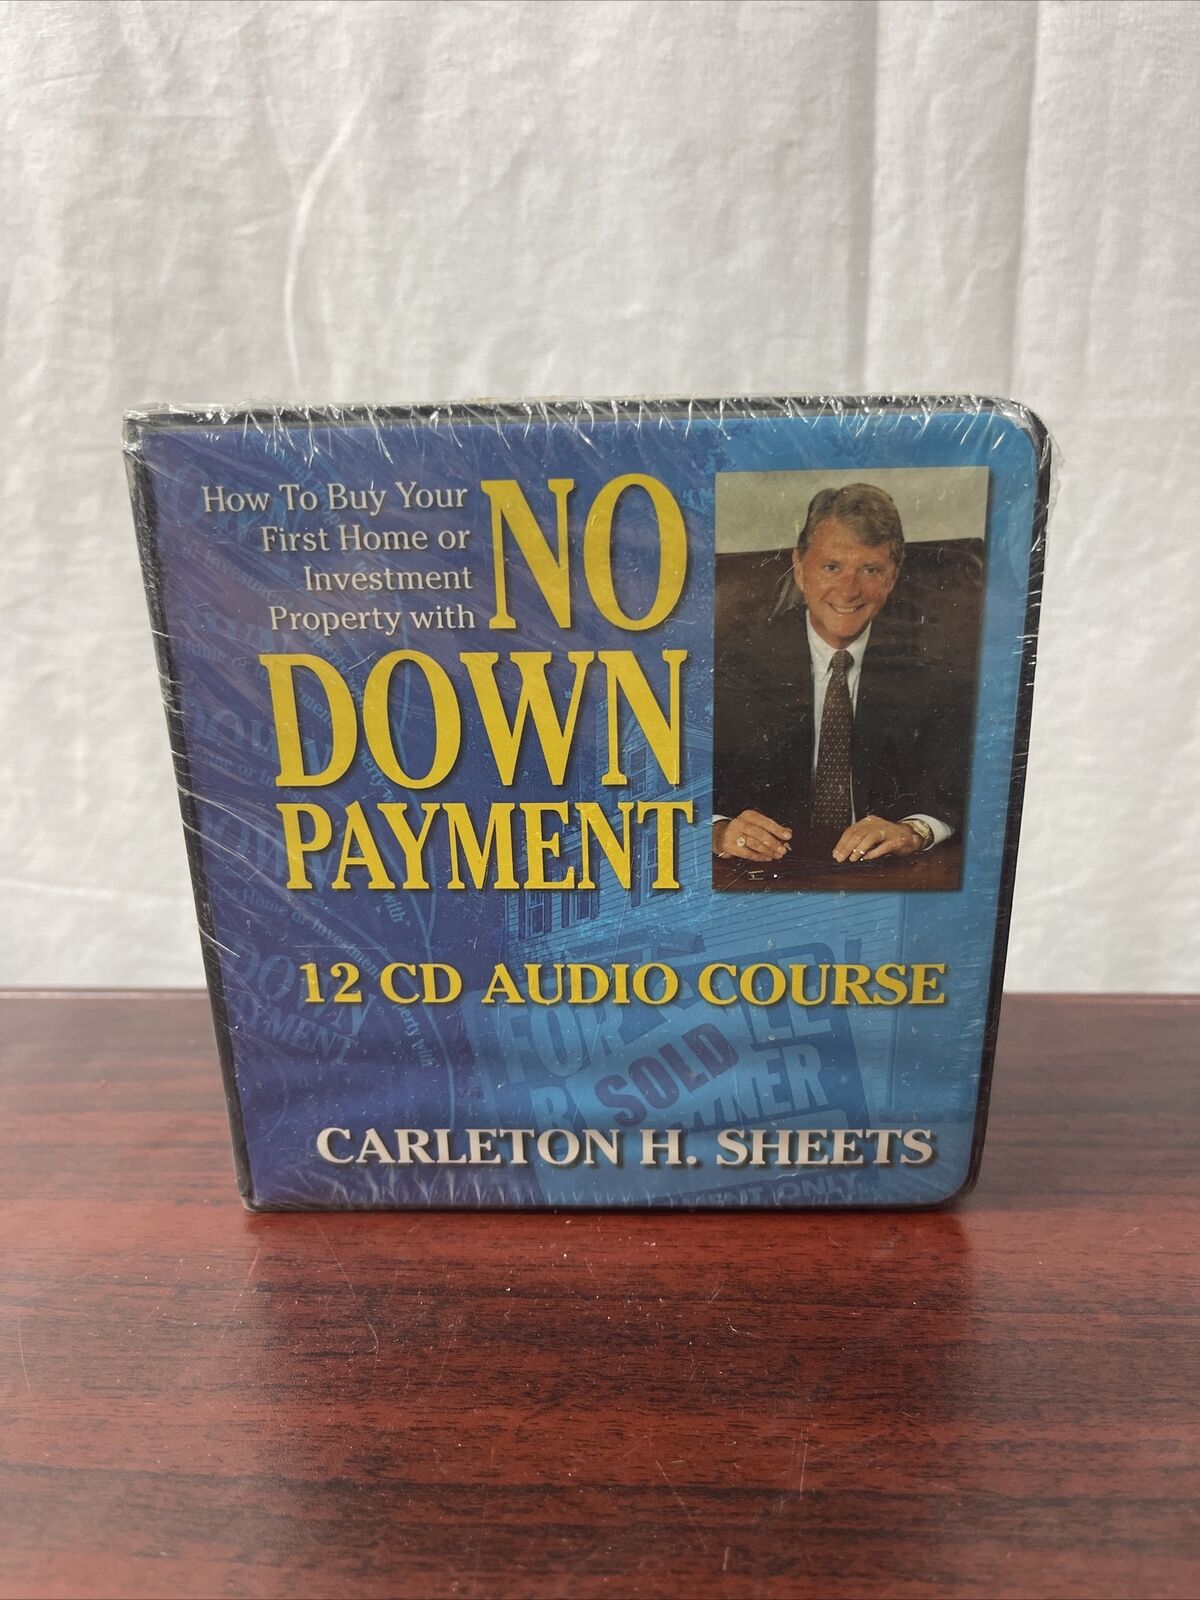 No Down Payment Carleton H Sheets 12 Cd Audio Course First Home Investment Prop